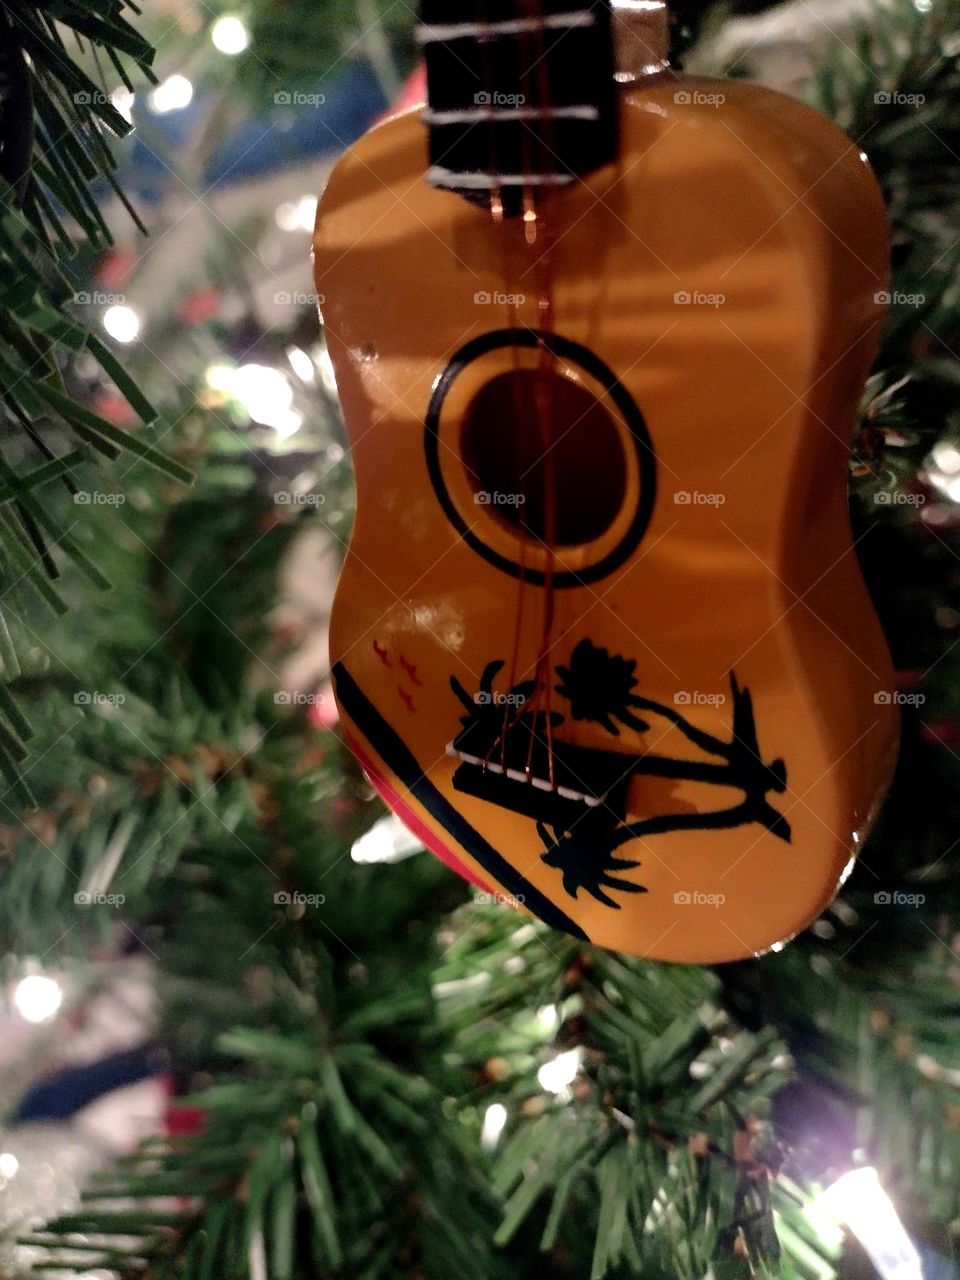 Unfiltered, beautiful, lovely close-up of a Christmas guitar ornament for the Holidays